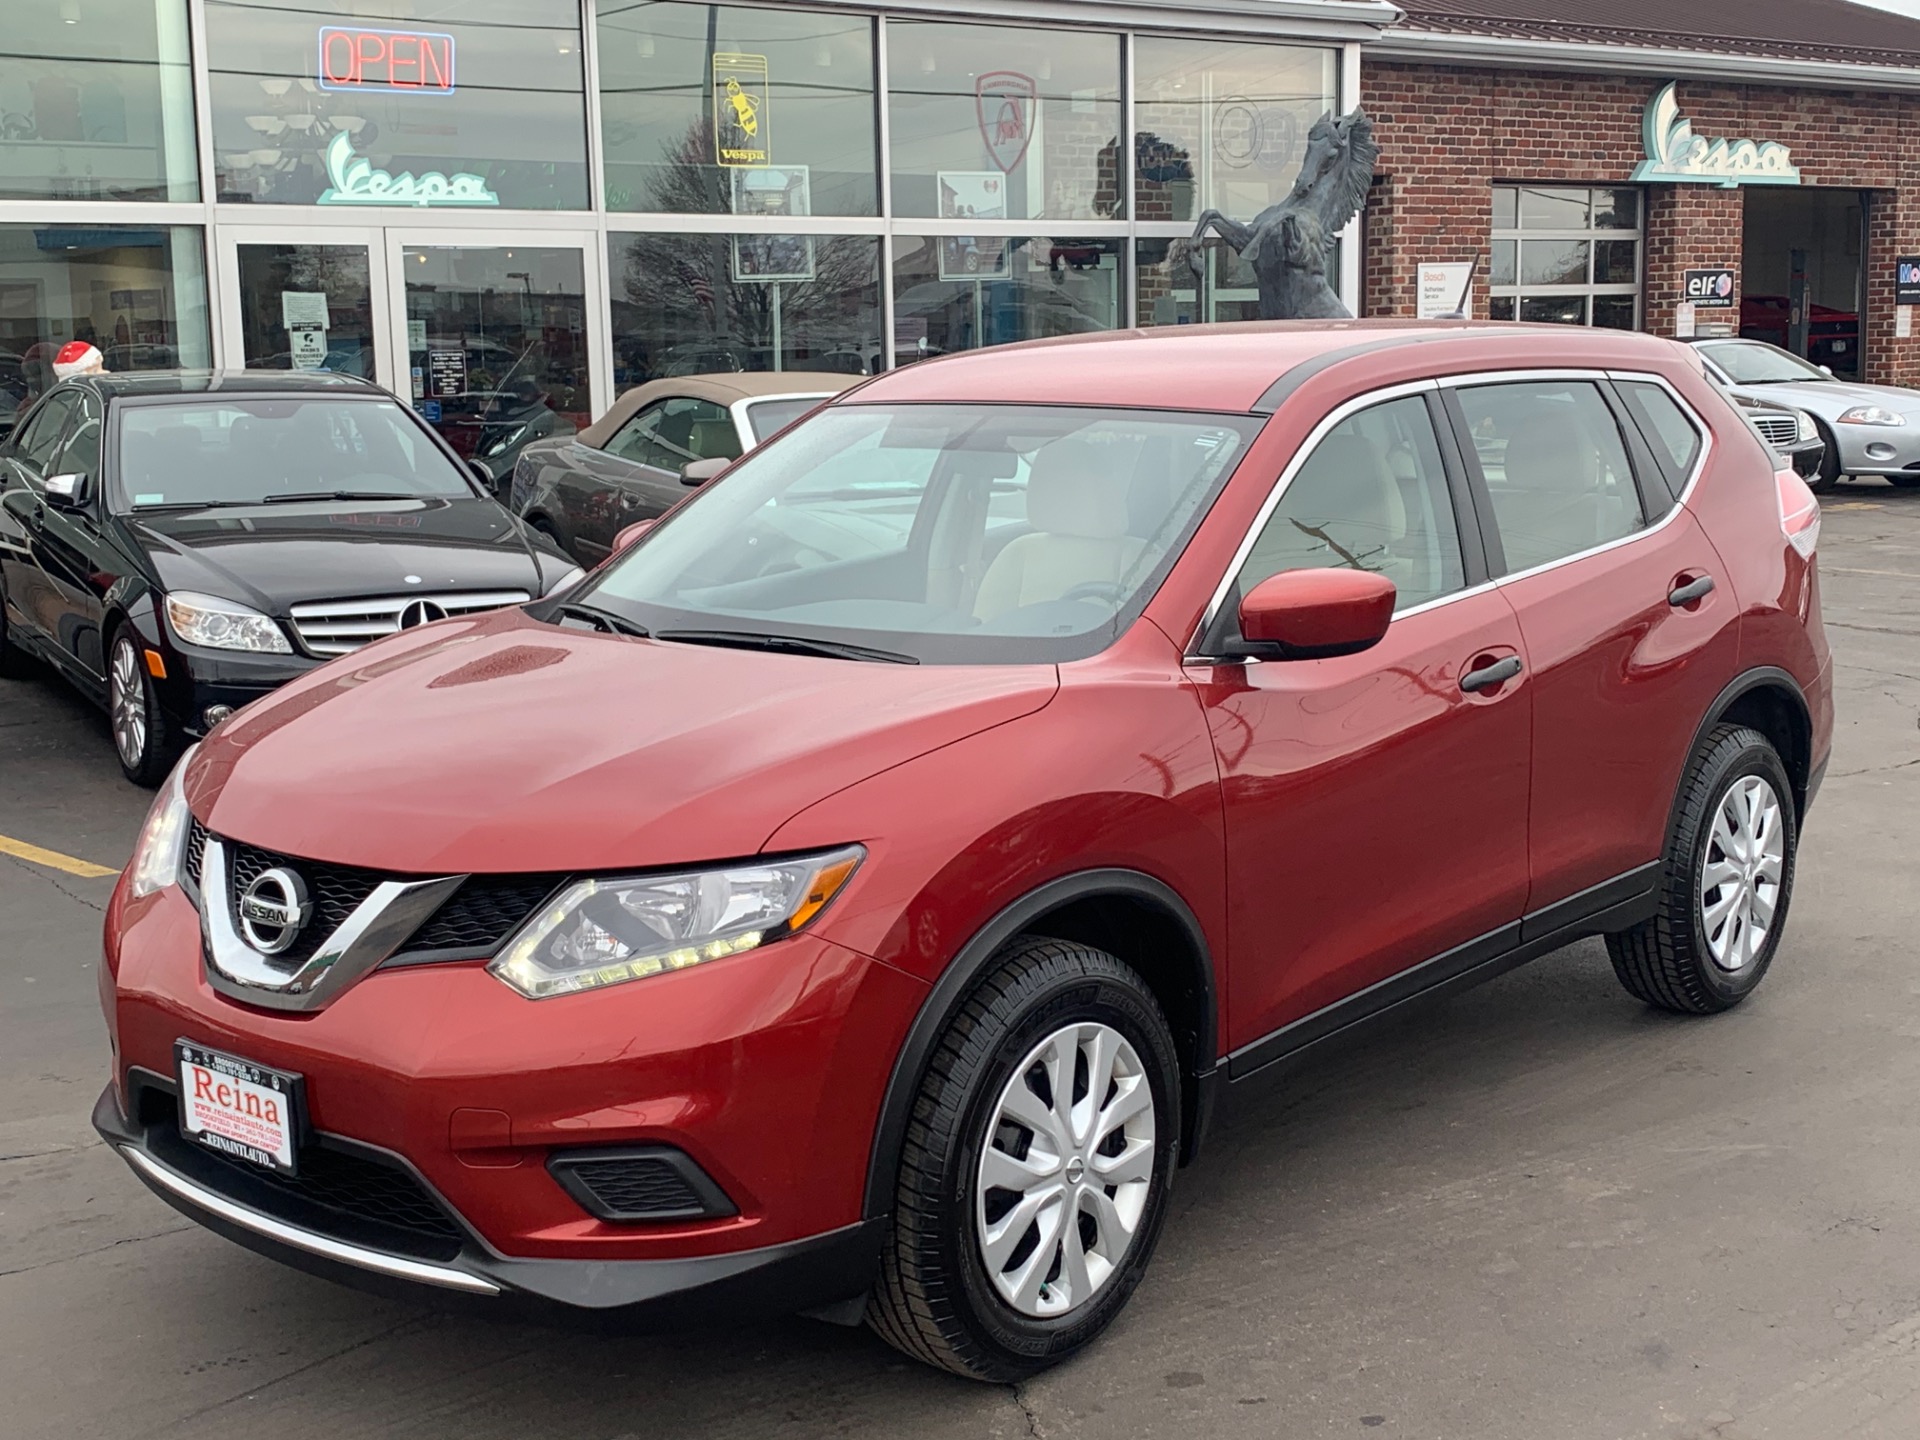 2016 Nissan Rogue S AWD Stock # C6712 for sale near Brookfield, WI | WI  Nissan Dealer